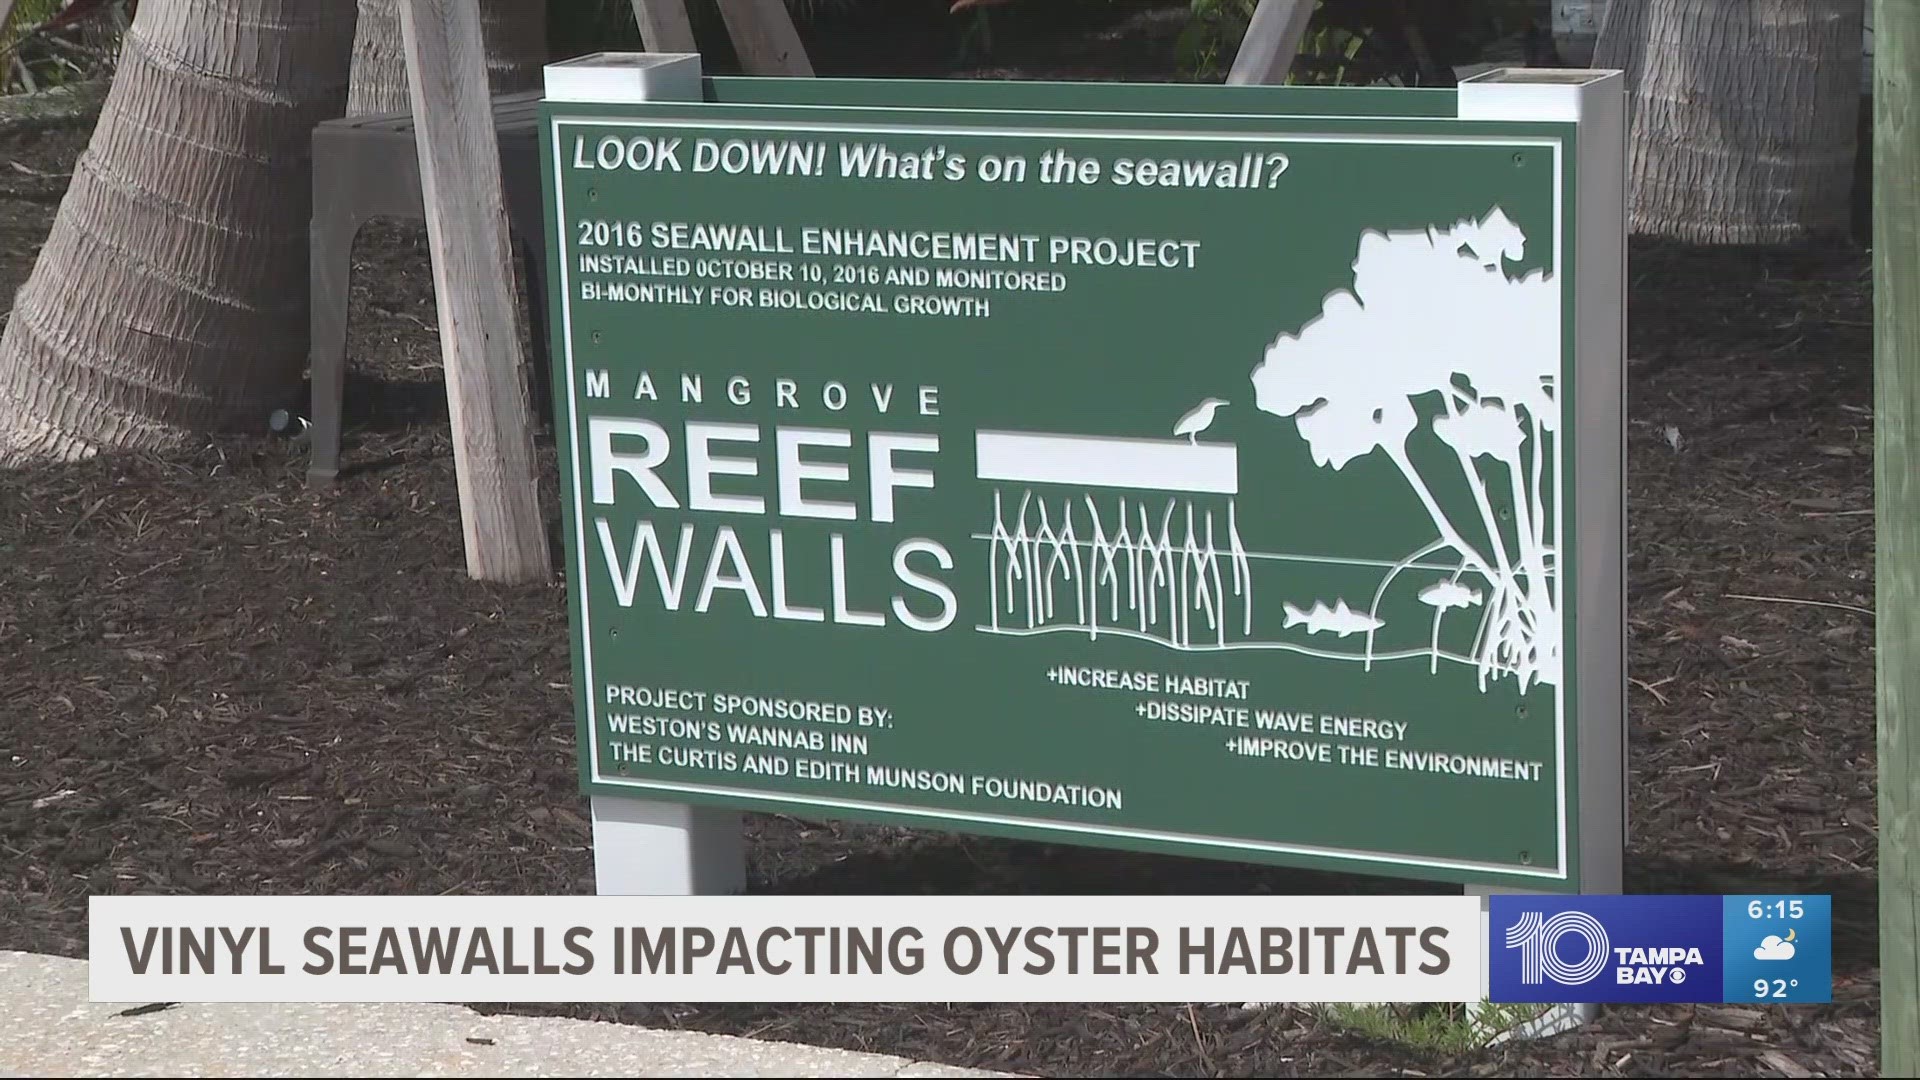 Scientists have observed oysters that are not attaching correctly to vinyl seawalls compared to concrete ones.